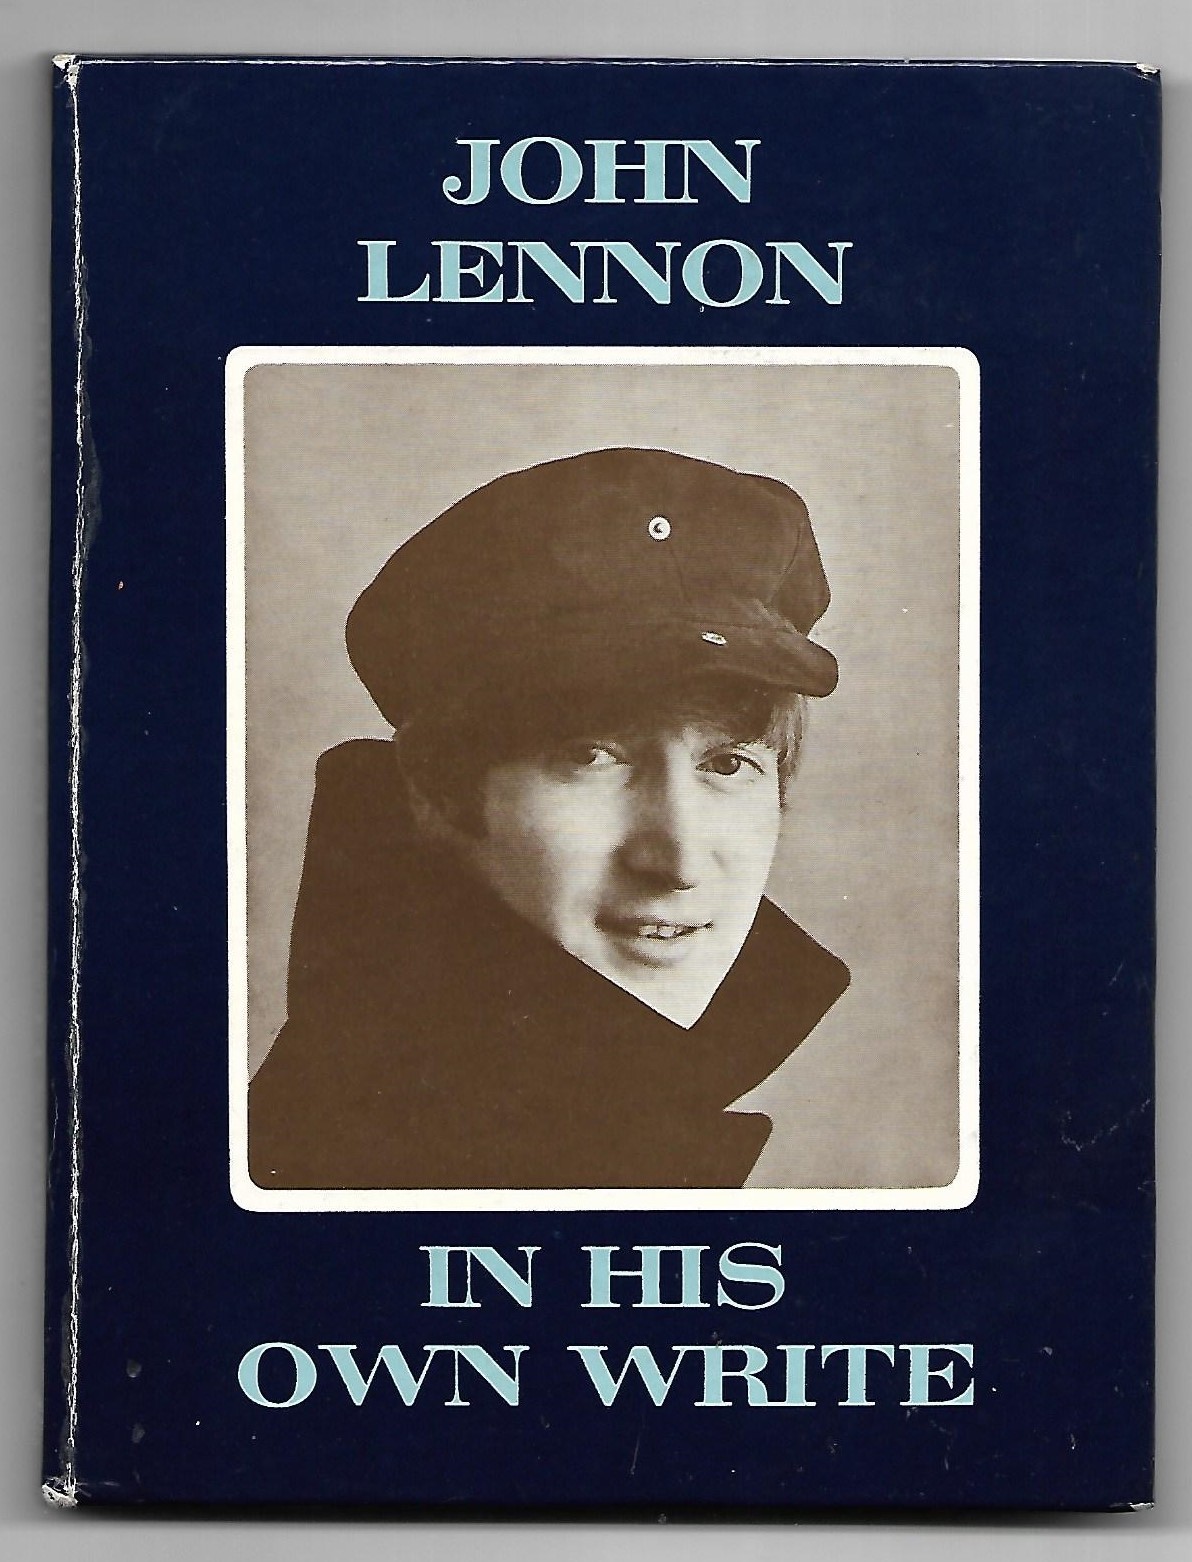 John Lennon In His Own Write book first edition published by Jonathan Cape 1964 UK